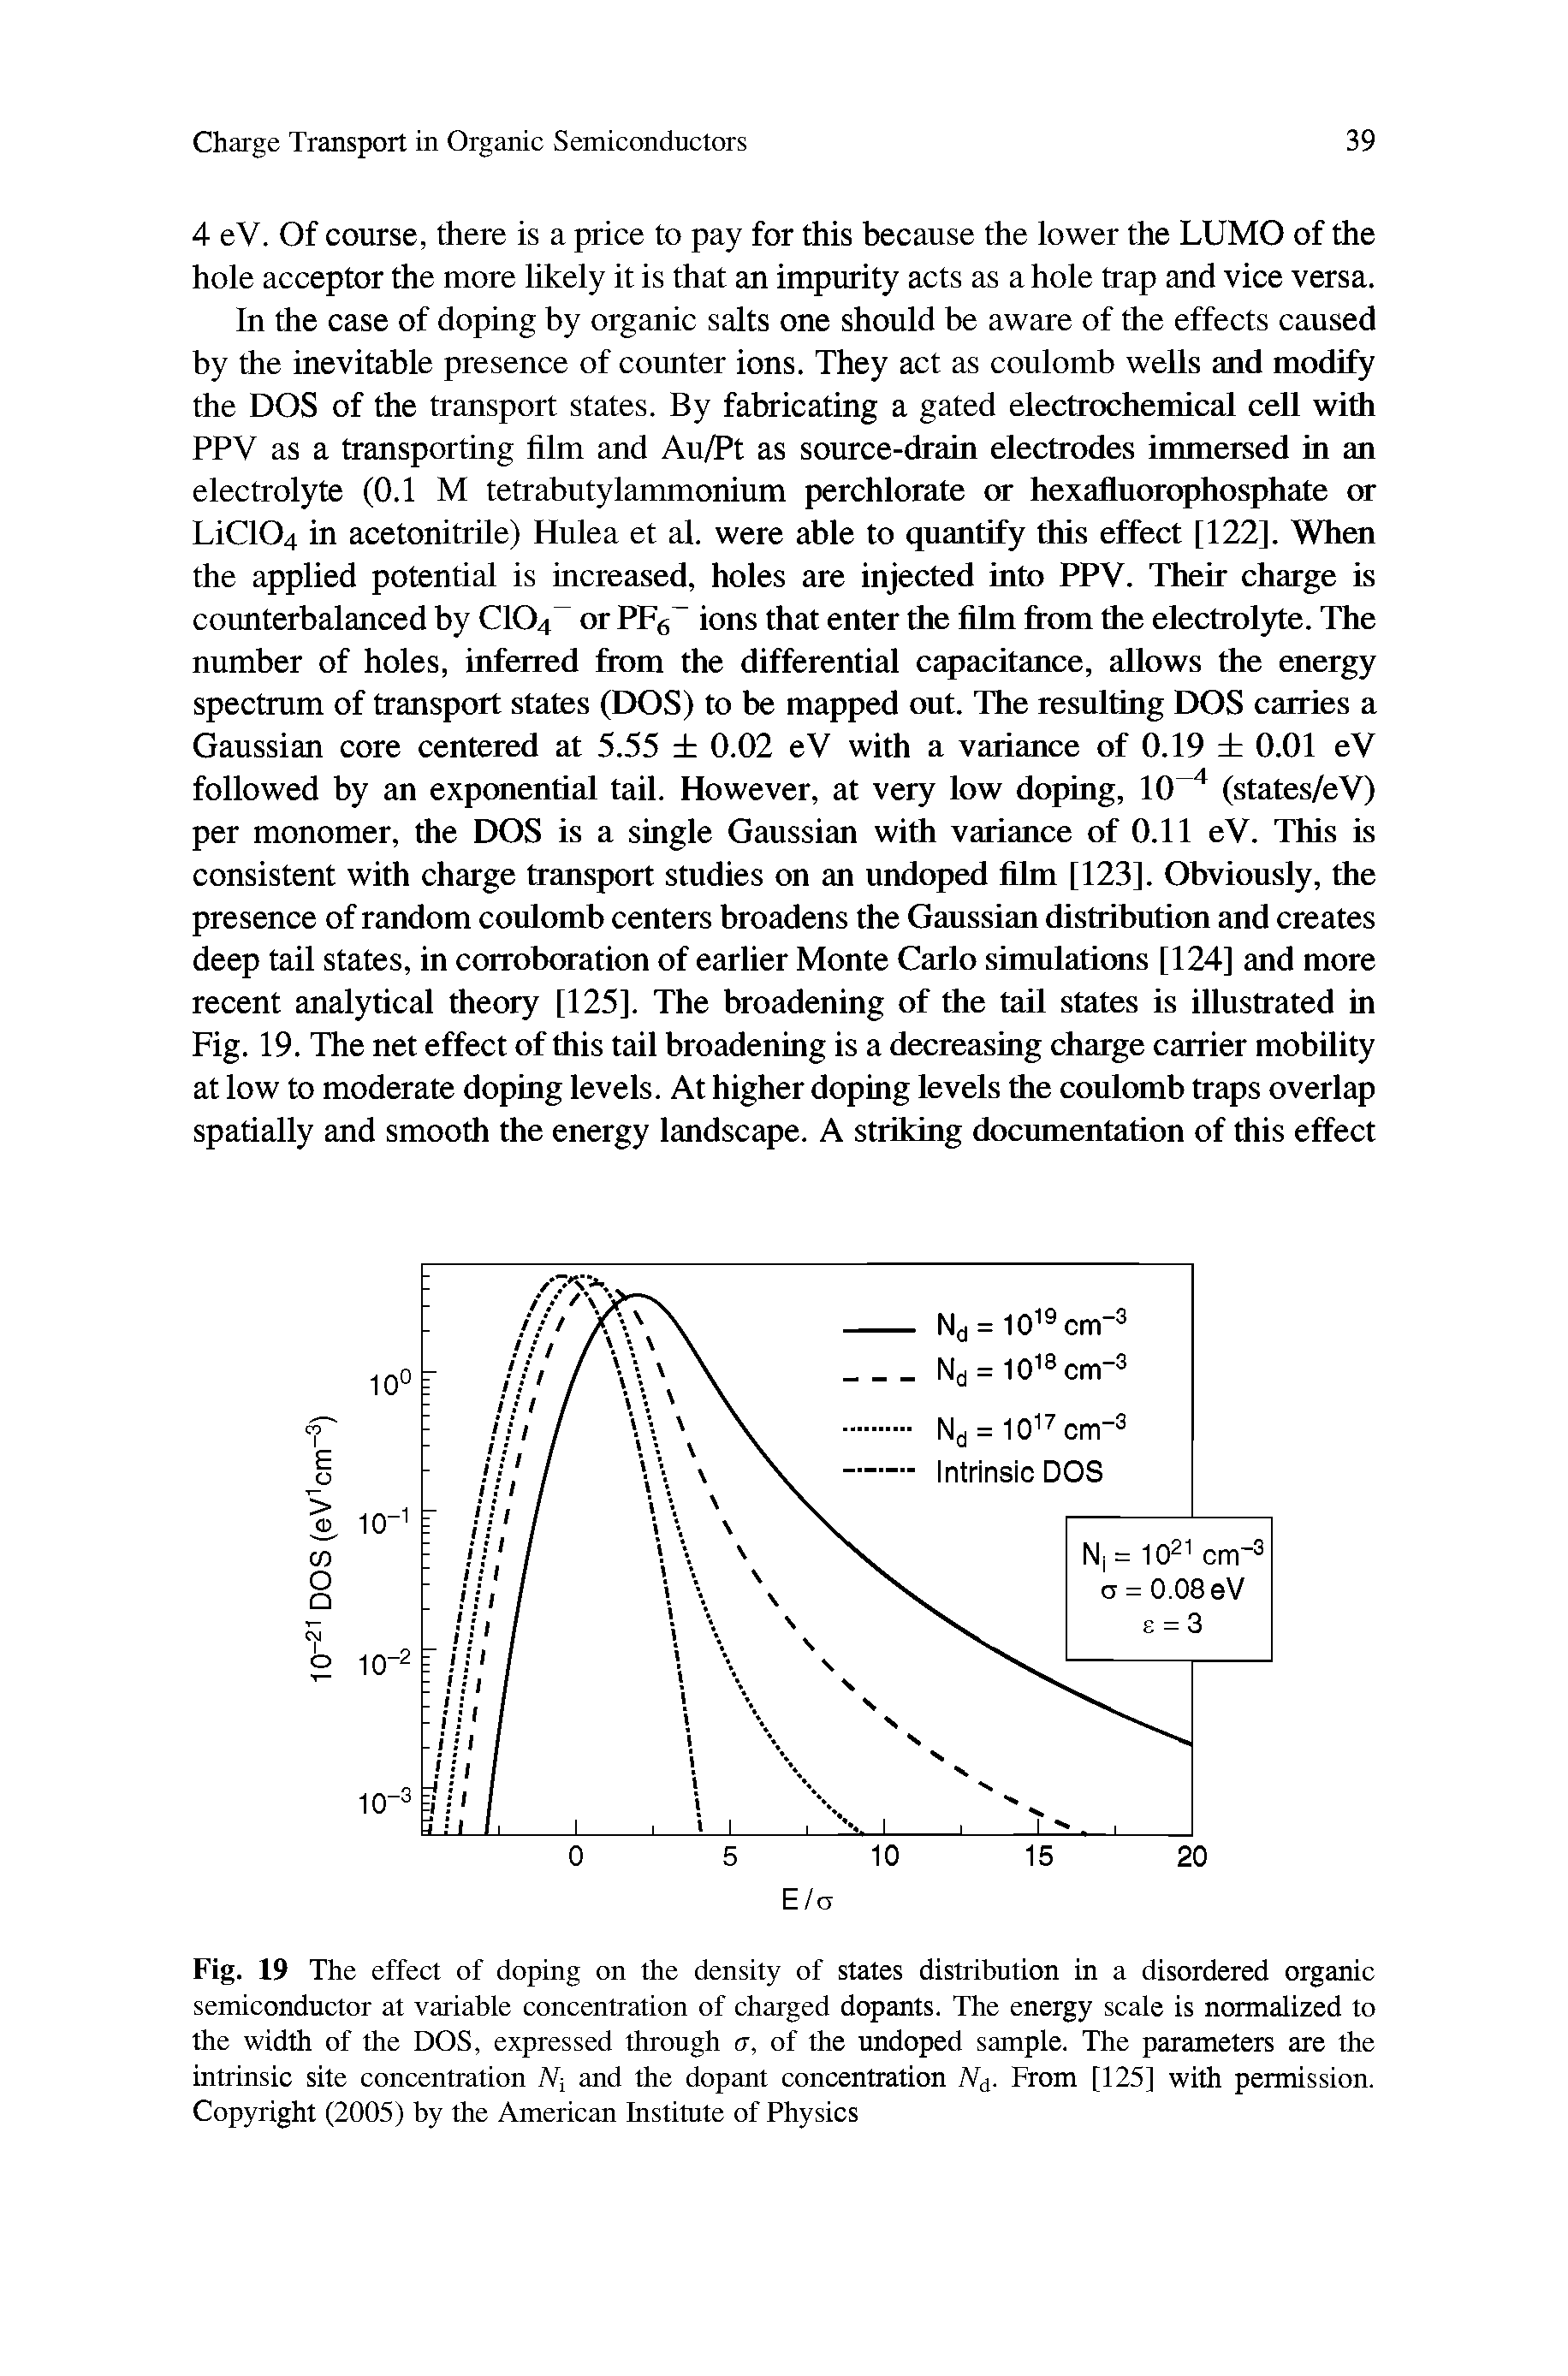 Fig. 19 The effect of doping on the density of states distribution in a disordered organic semiconductor at variable concentration of charged dopants. The energy scale is normalized to the width of the DOS, expressed through a, of the undoped sample. The parameters are the intrinsic site concentration V and the dopant concentration N. From [125] with permission. Copyright (2005) by the American Institute of Physics...